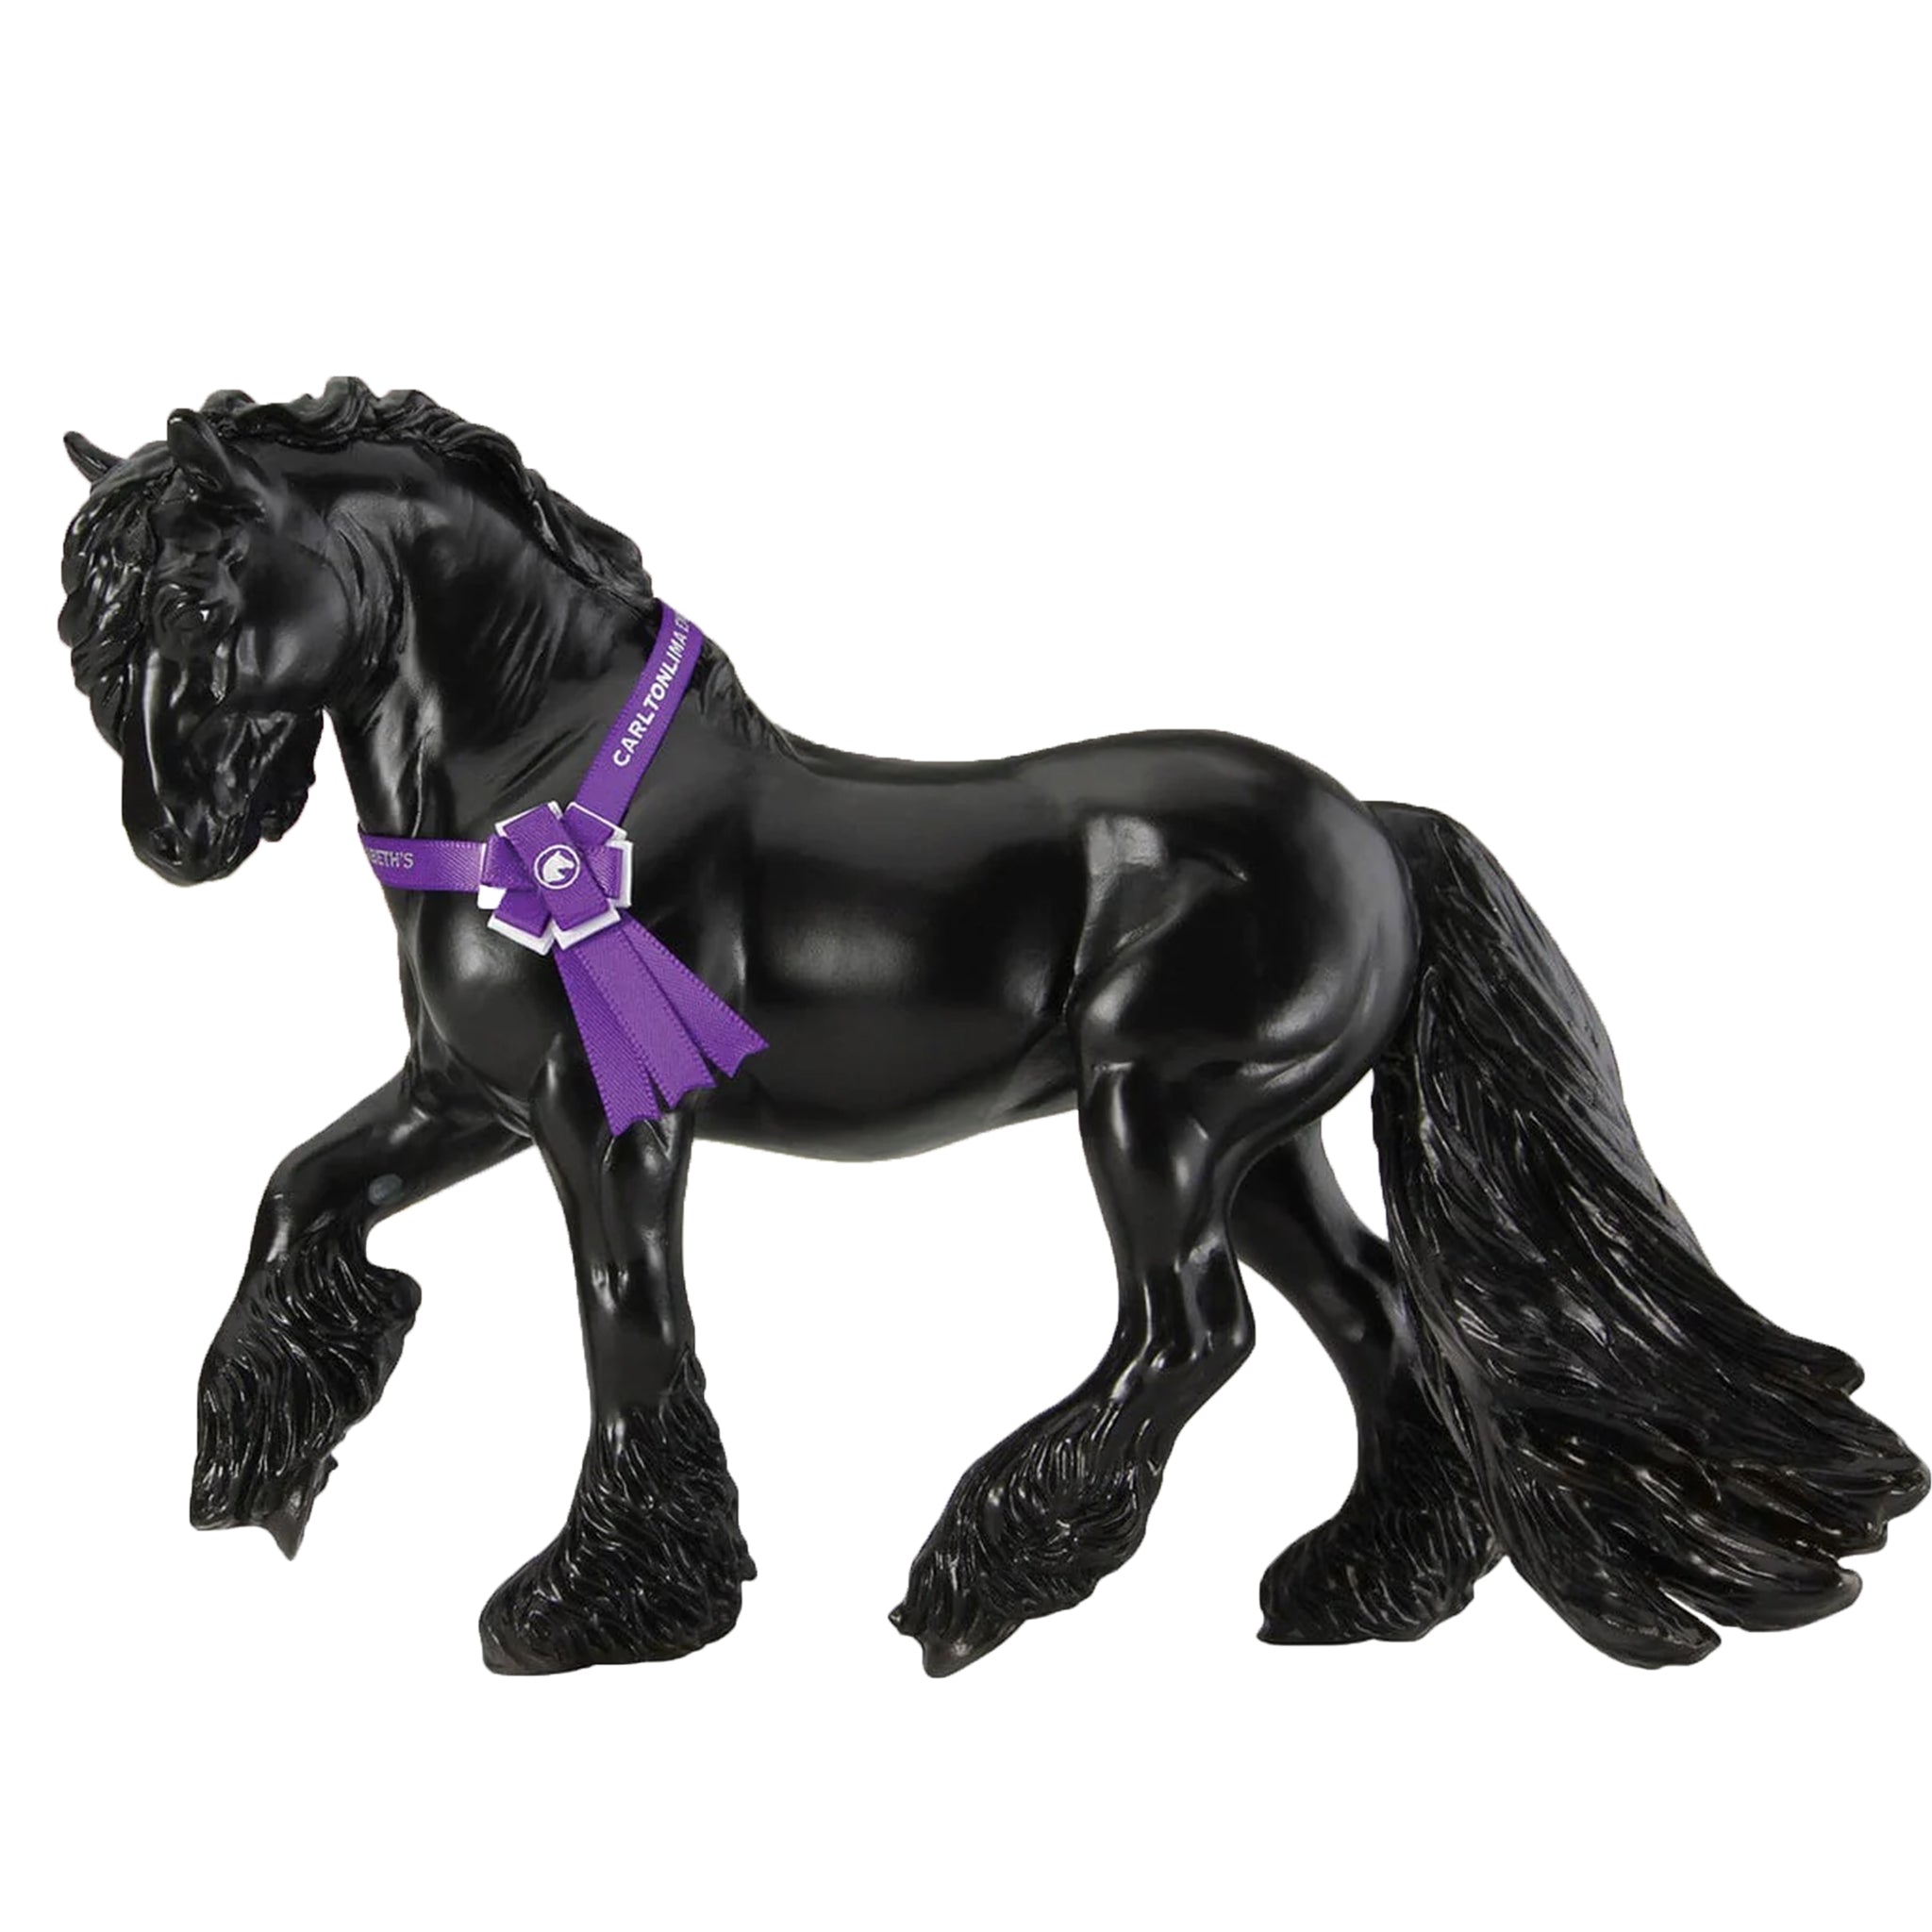 Breyer Traditional Carltonlima Emma - The Queen's Pony